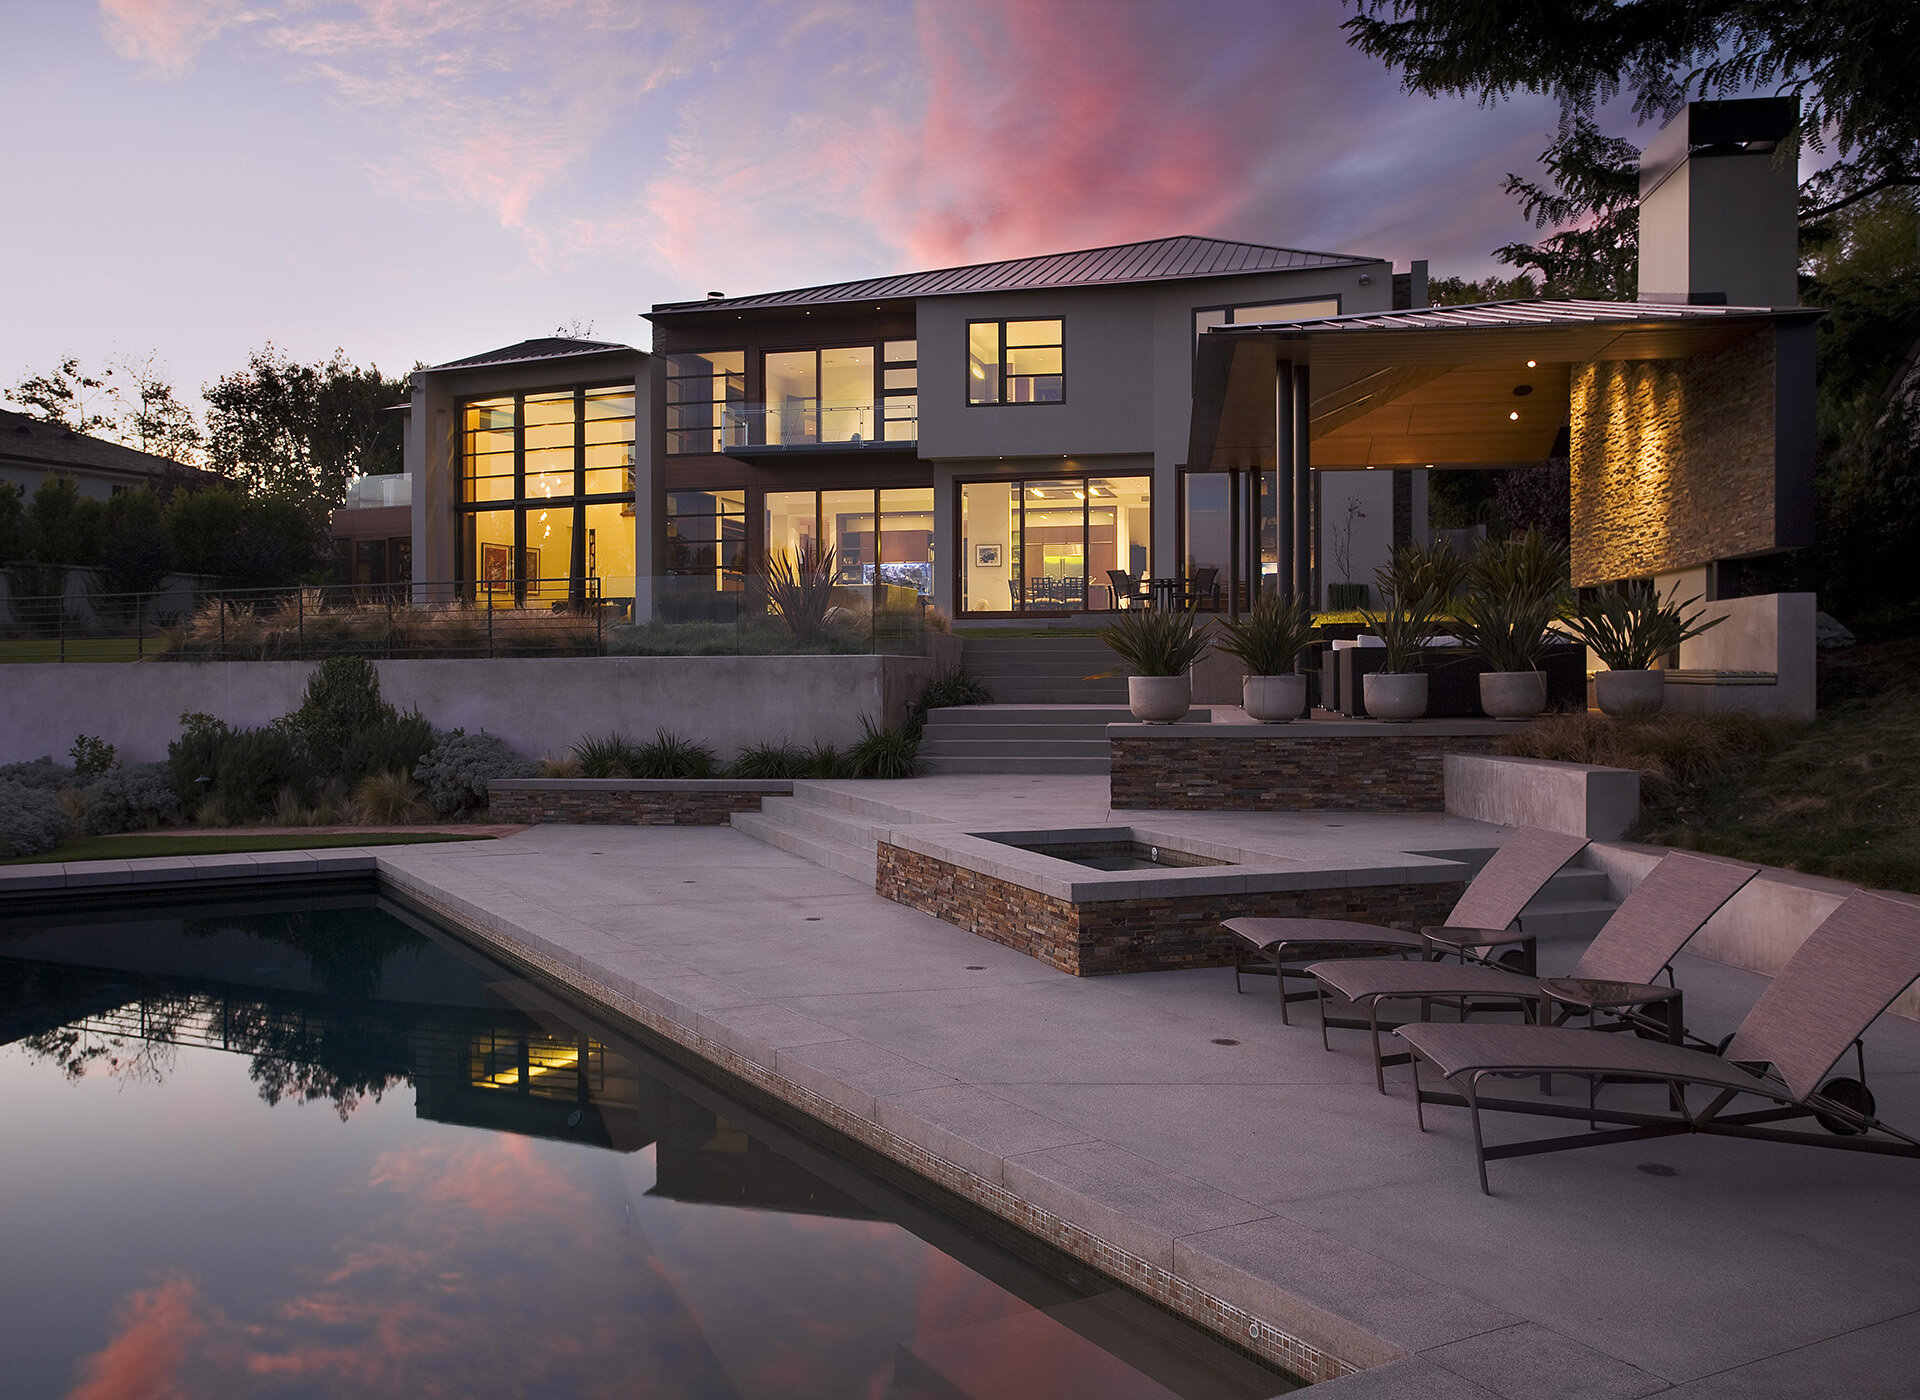  Contemporary general contractor built custom architectural home in the Pacific Palisades neighborhood of Los Angeles with custom window design and installation., outdoor covered living room, and high end zero edge infinity pool.  